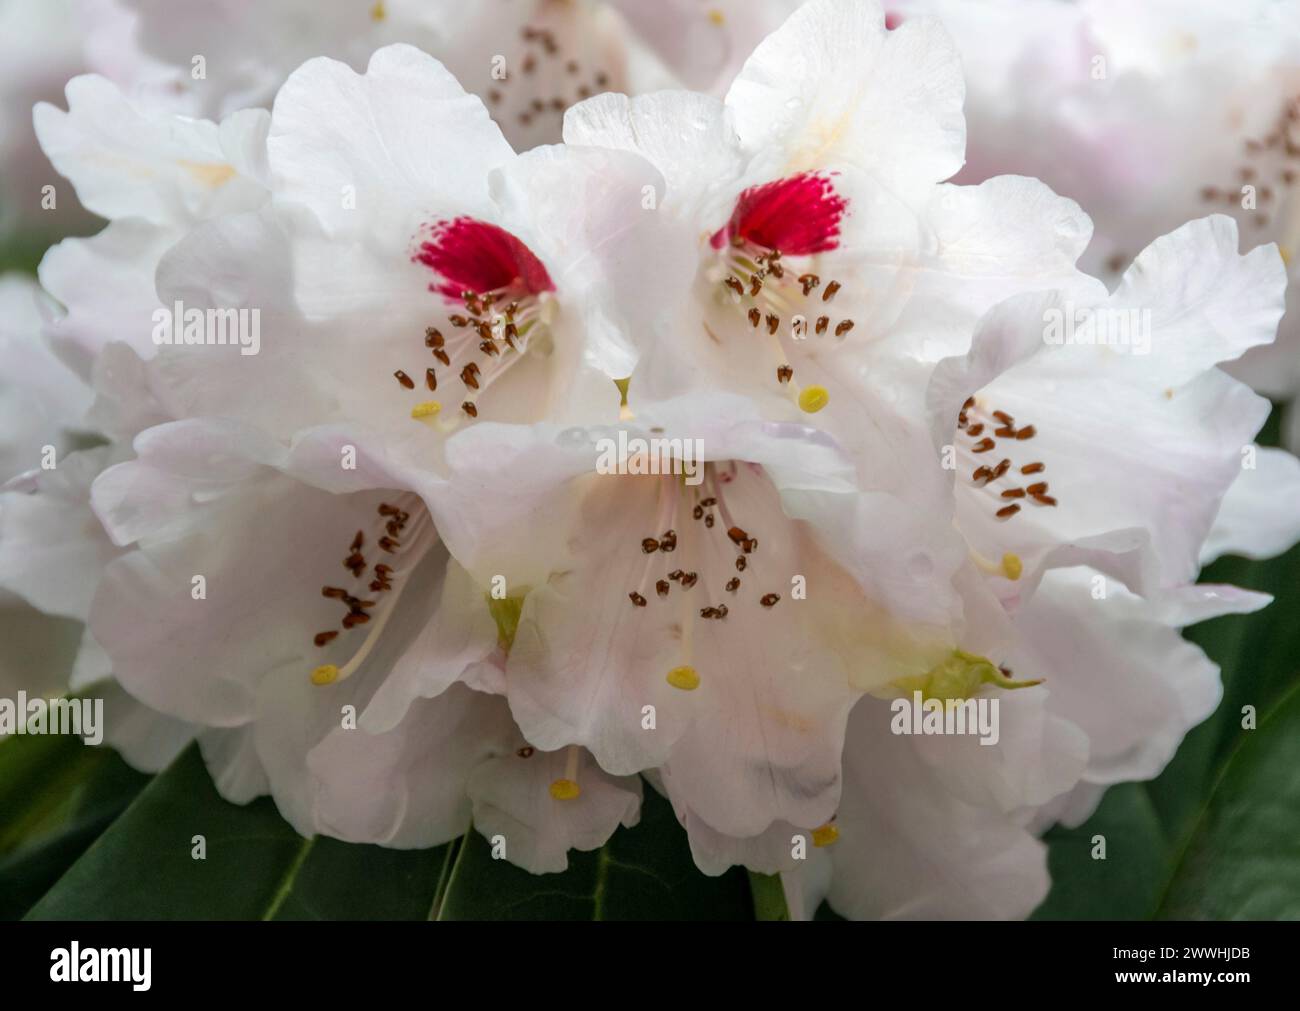 A white Campbellii Rhododendron bloom in full flower Stock Photo